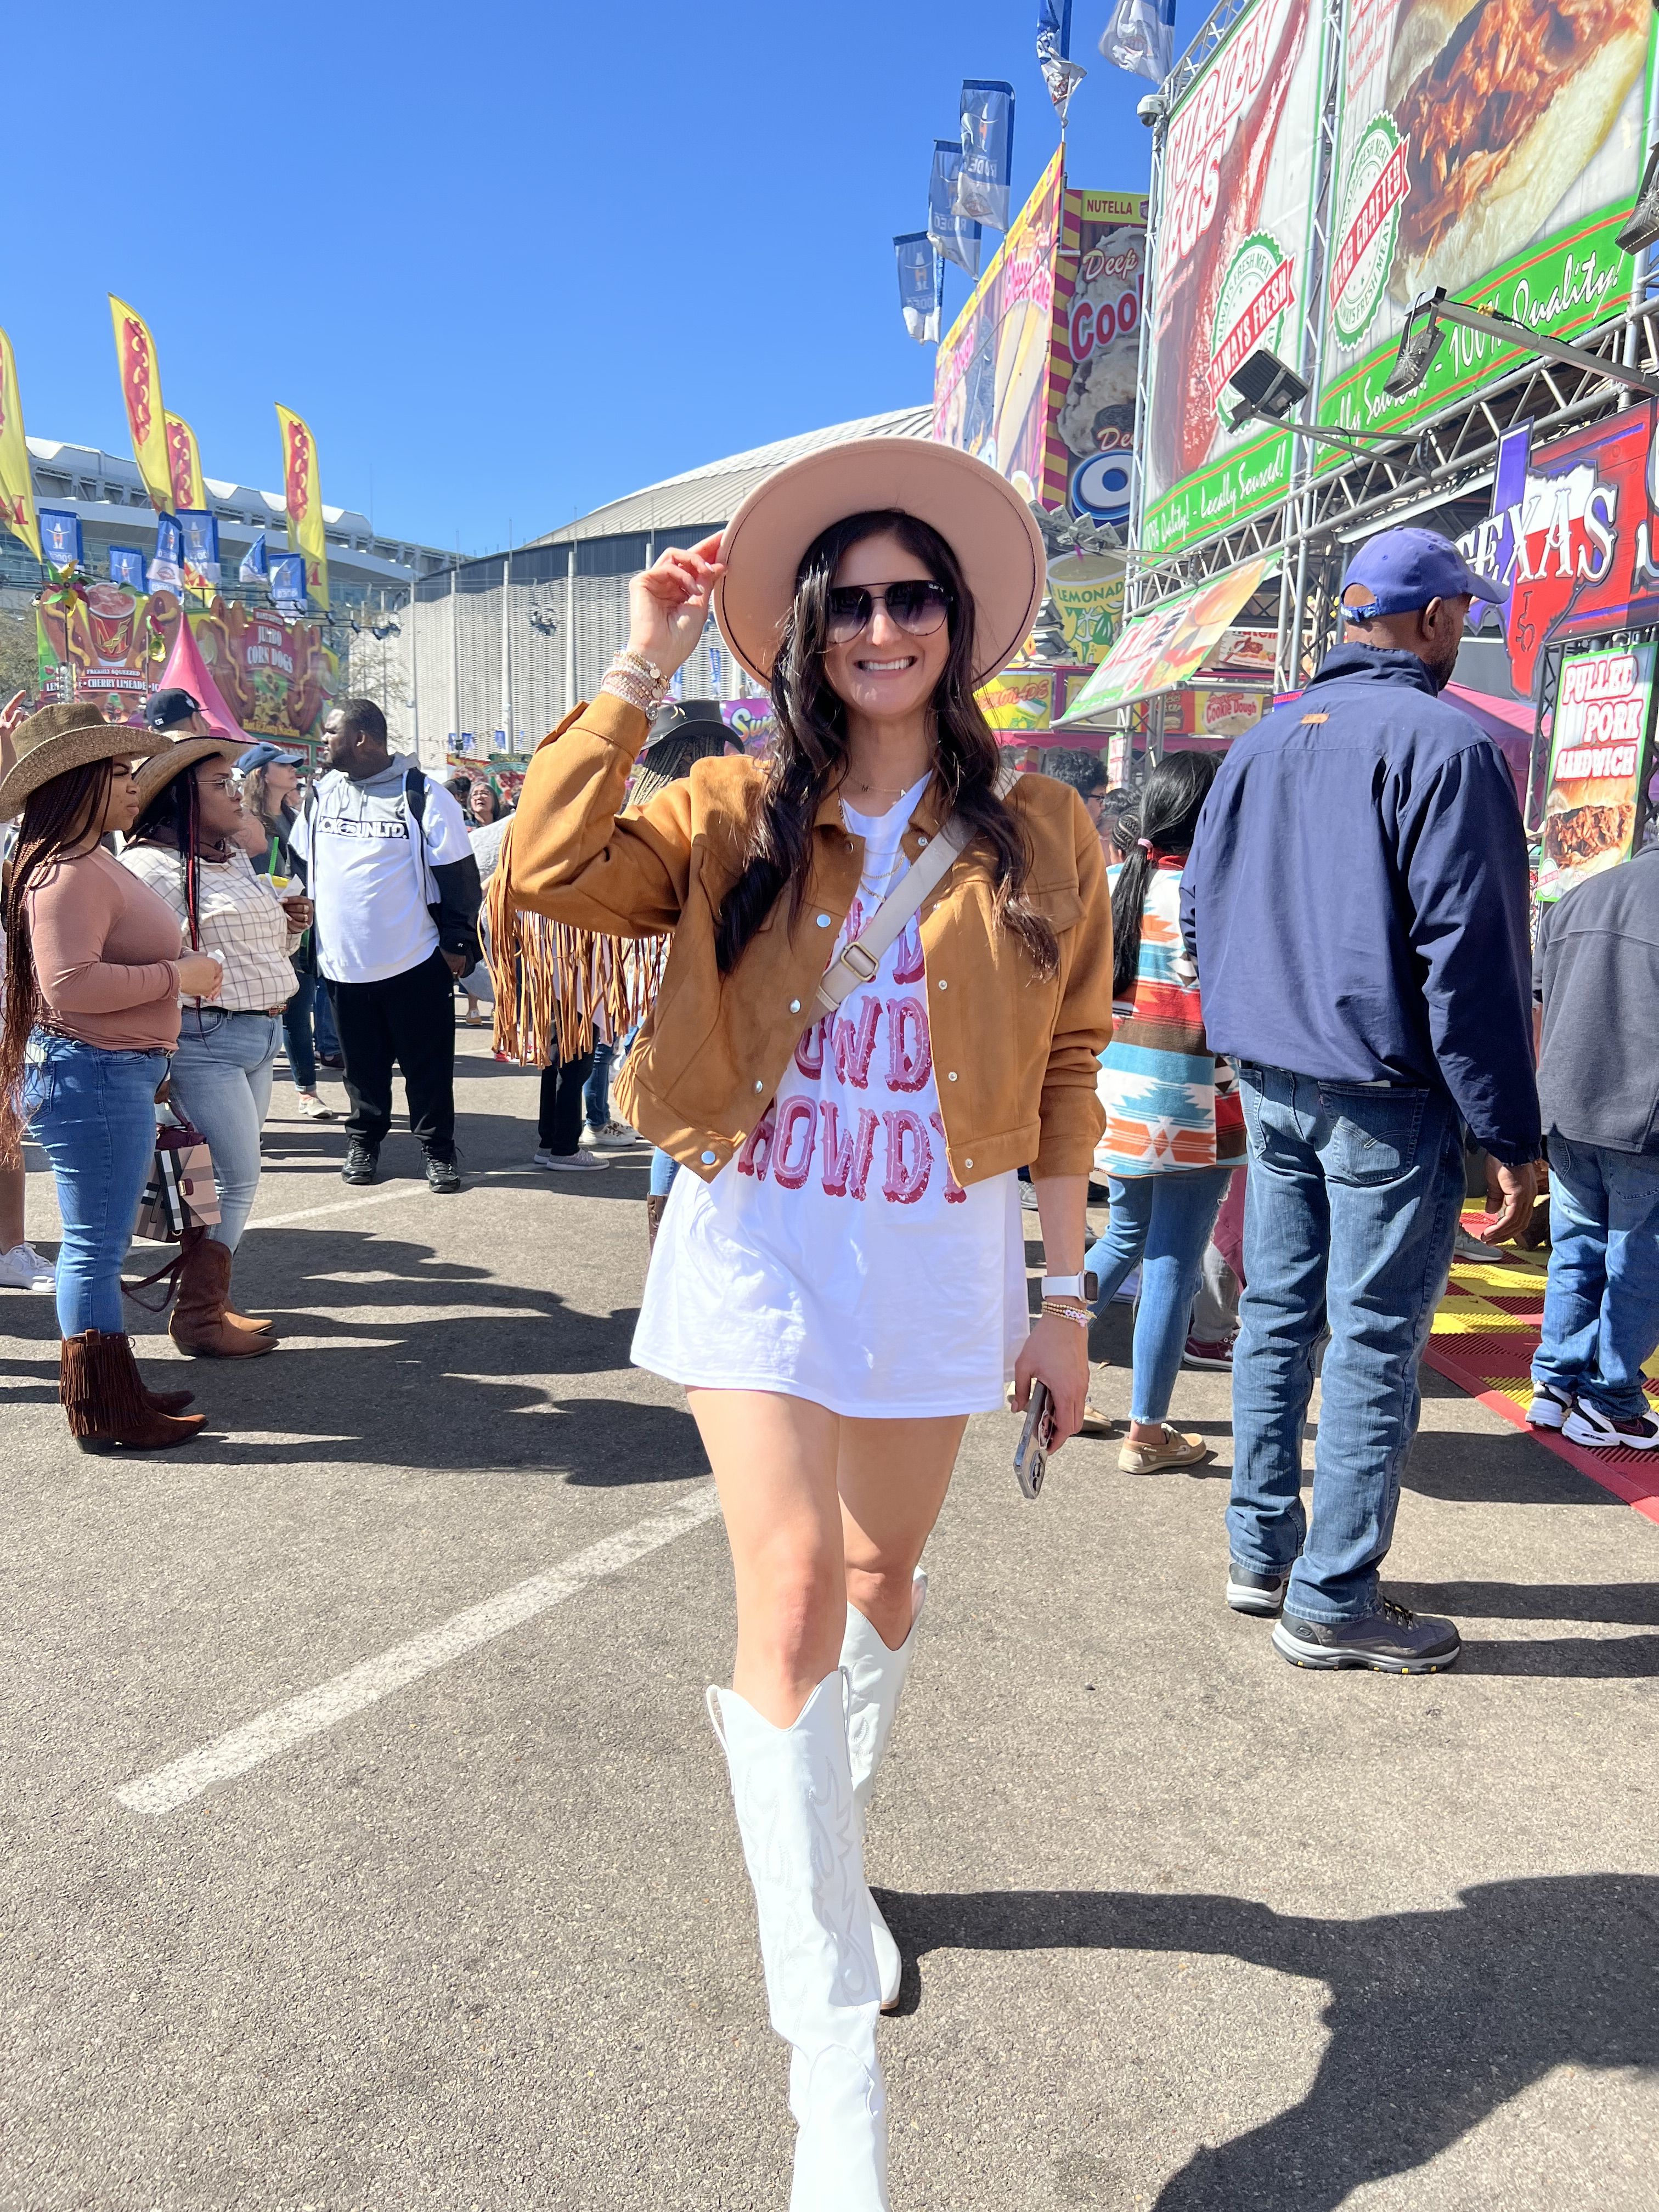 Fashion Tips for Wearing Cowboy Boots the Right Way – Country View